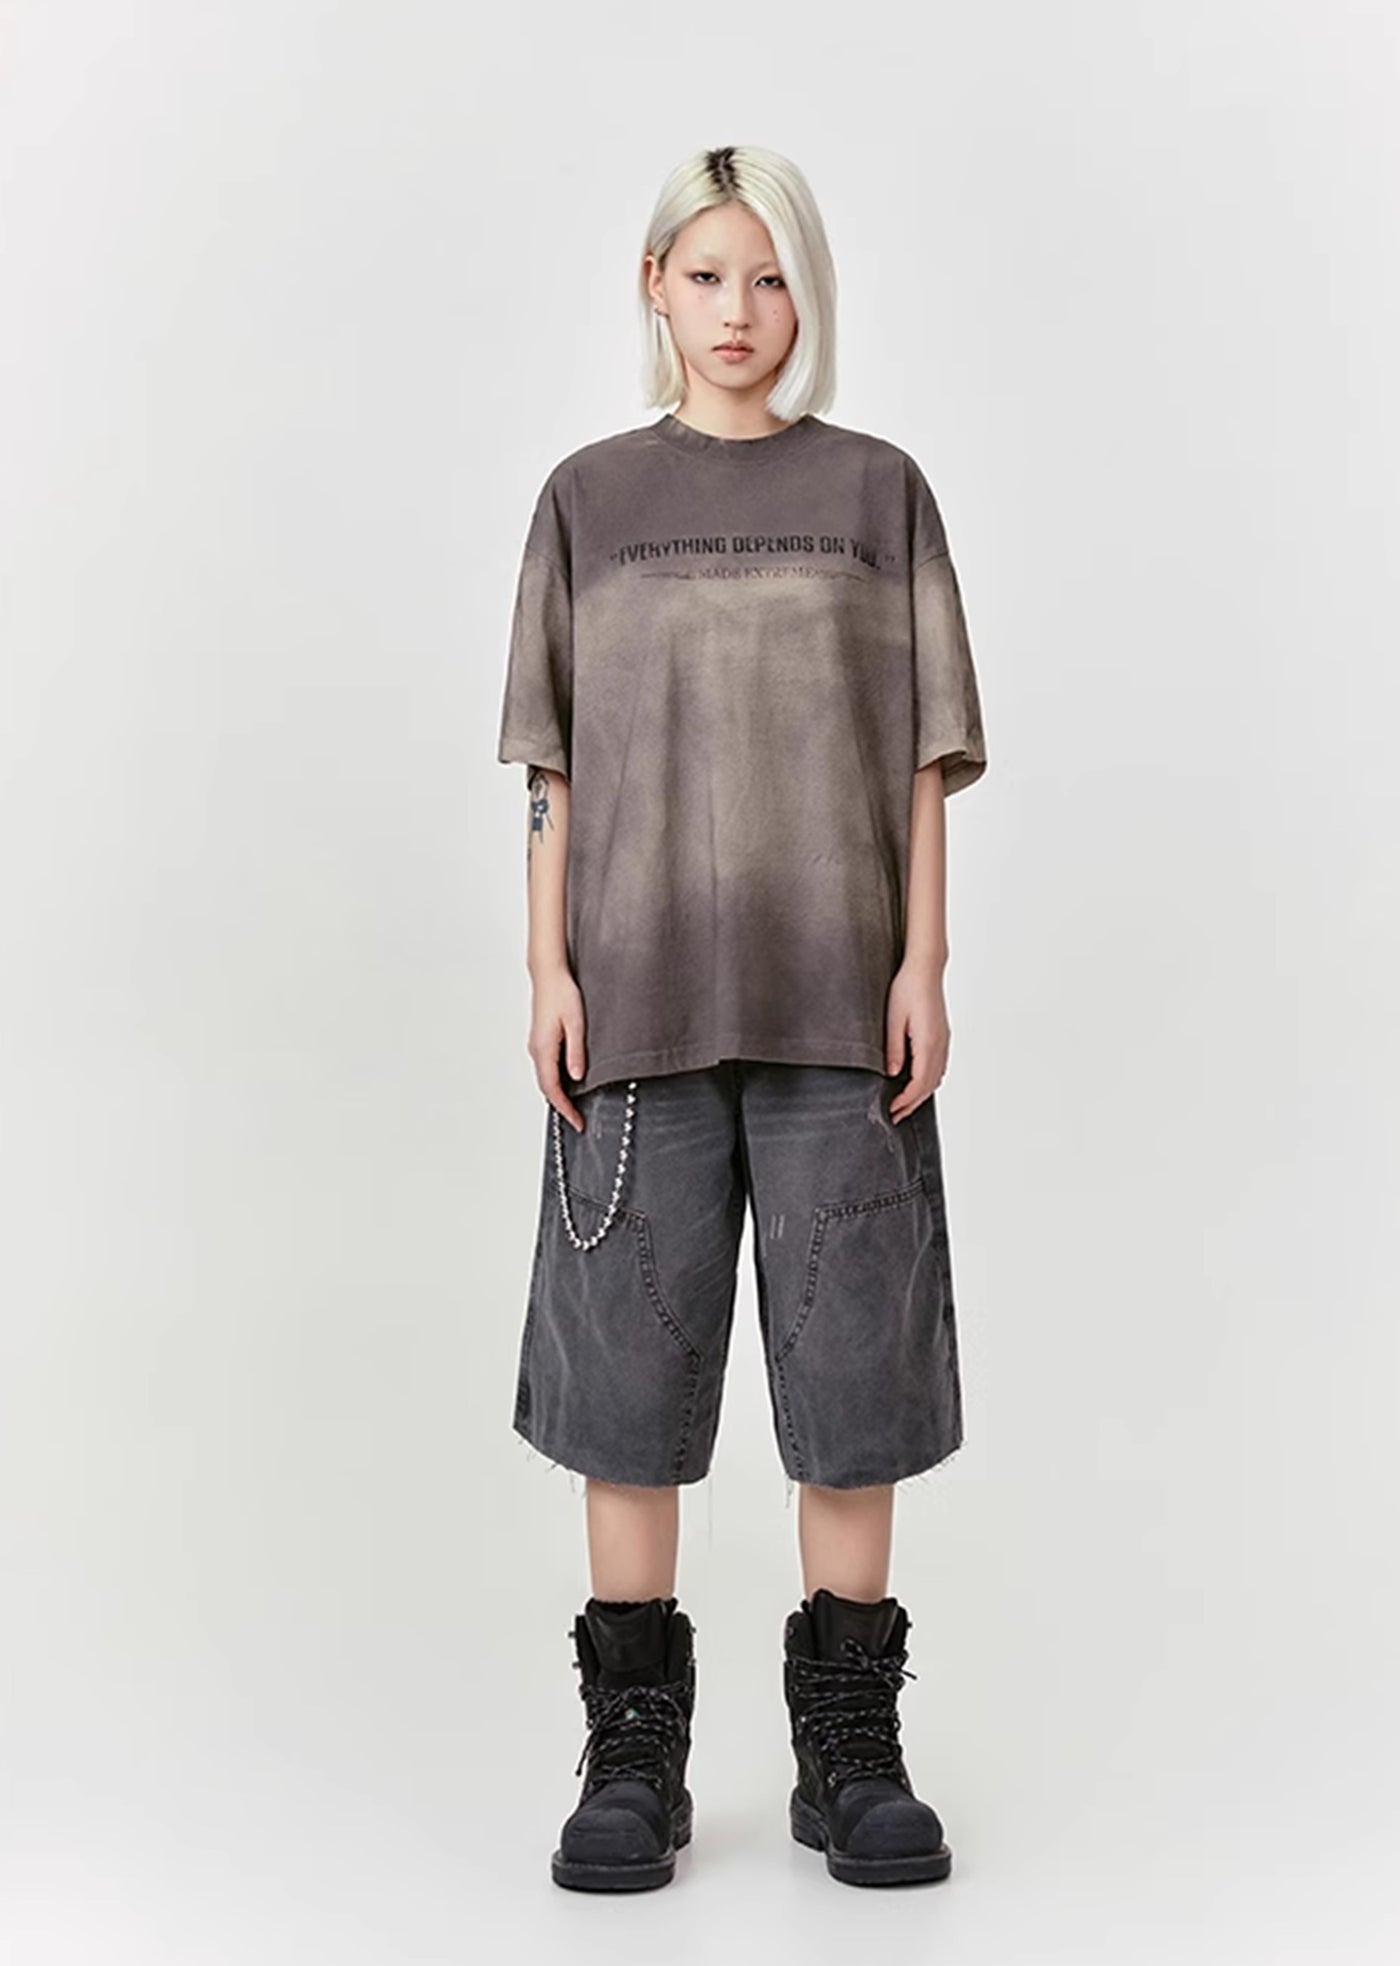 【MADEEXTREME】Fully washed simple design mode short sleeve T-shirt  MT0005